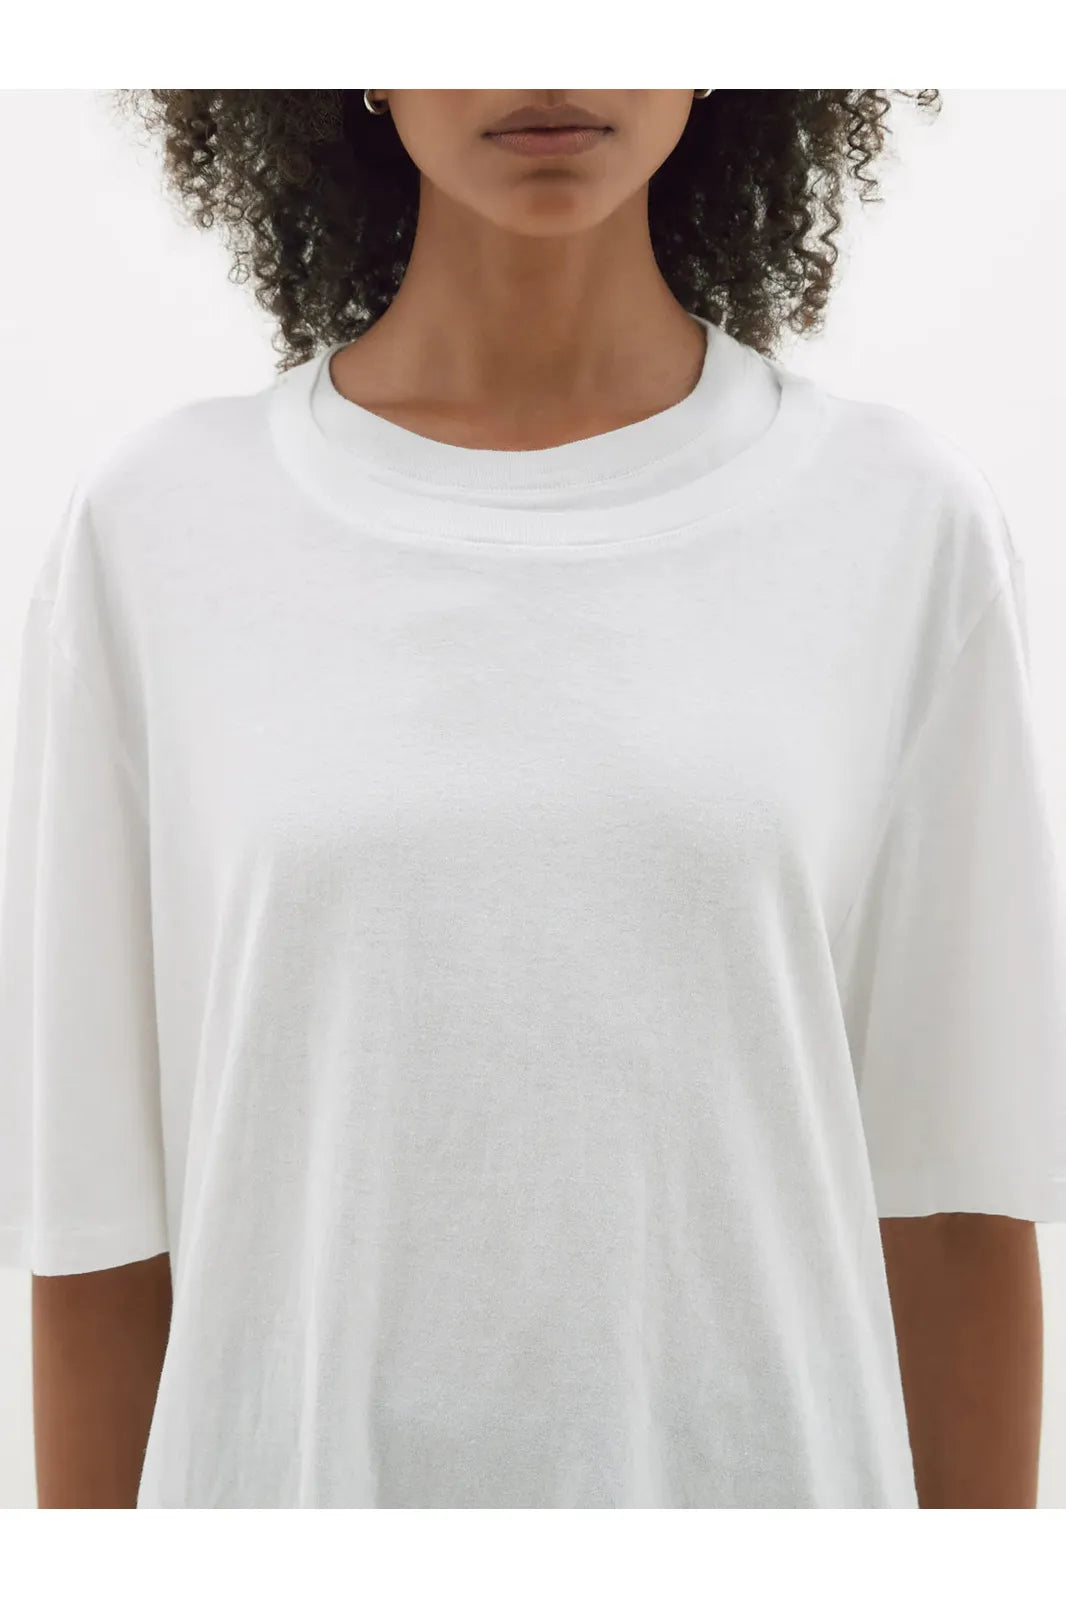 Layered Boyfriend T-Shirt in White by Bassike